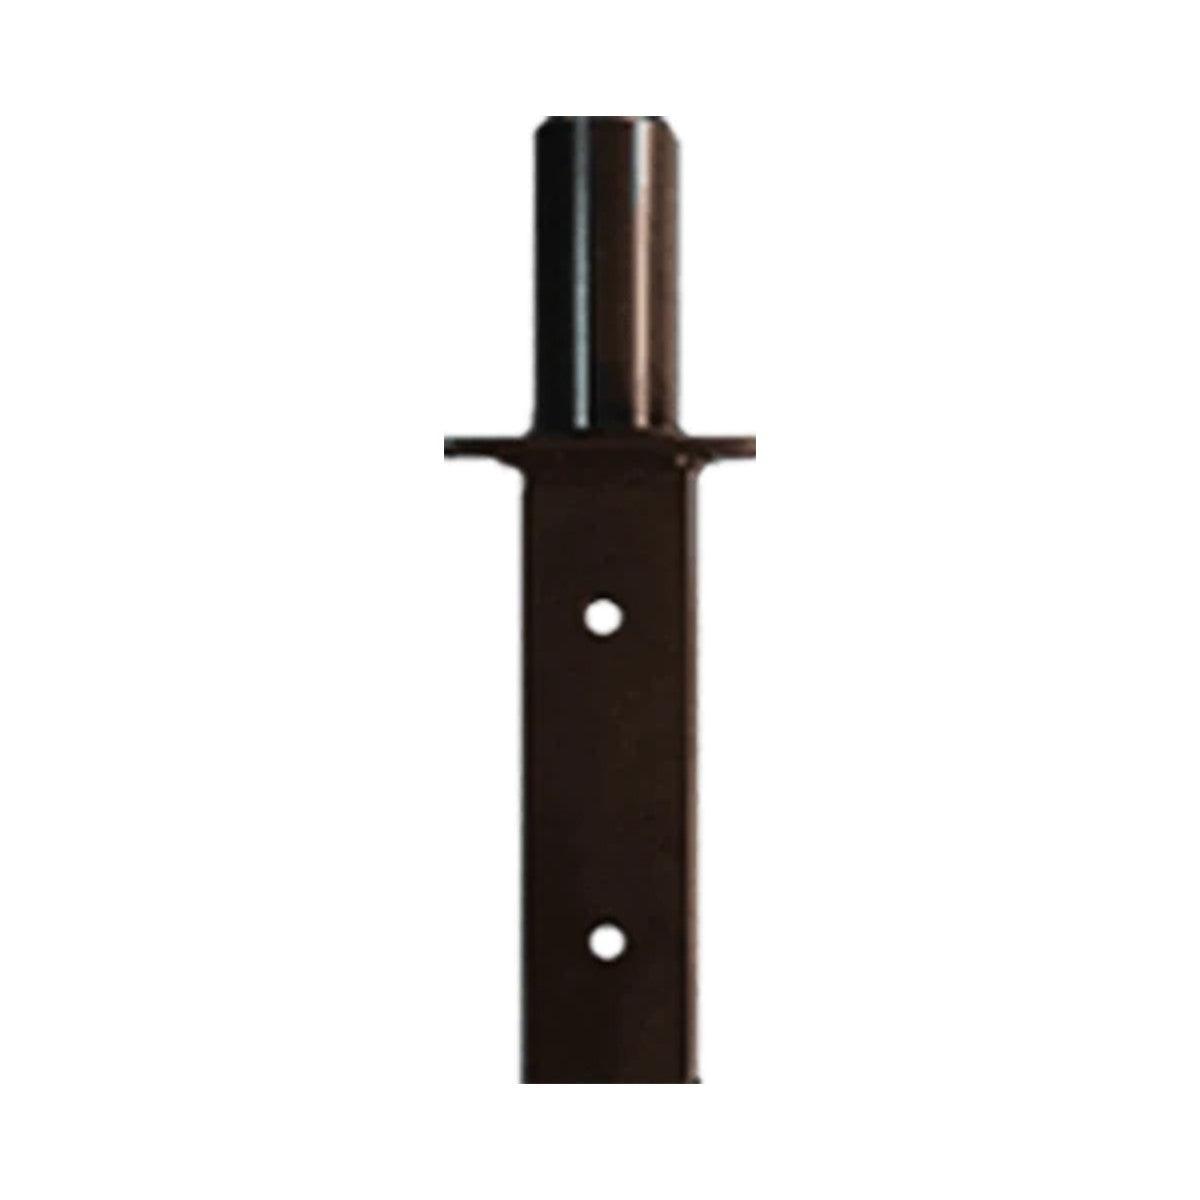 RAB Lighting BAD6 Poles Pole Adaptor For 2 3/8 Tenon To 6 Inches Square Pole, Bronze Finish - Bees Lighting